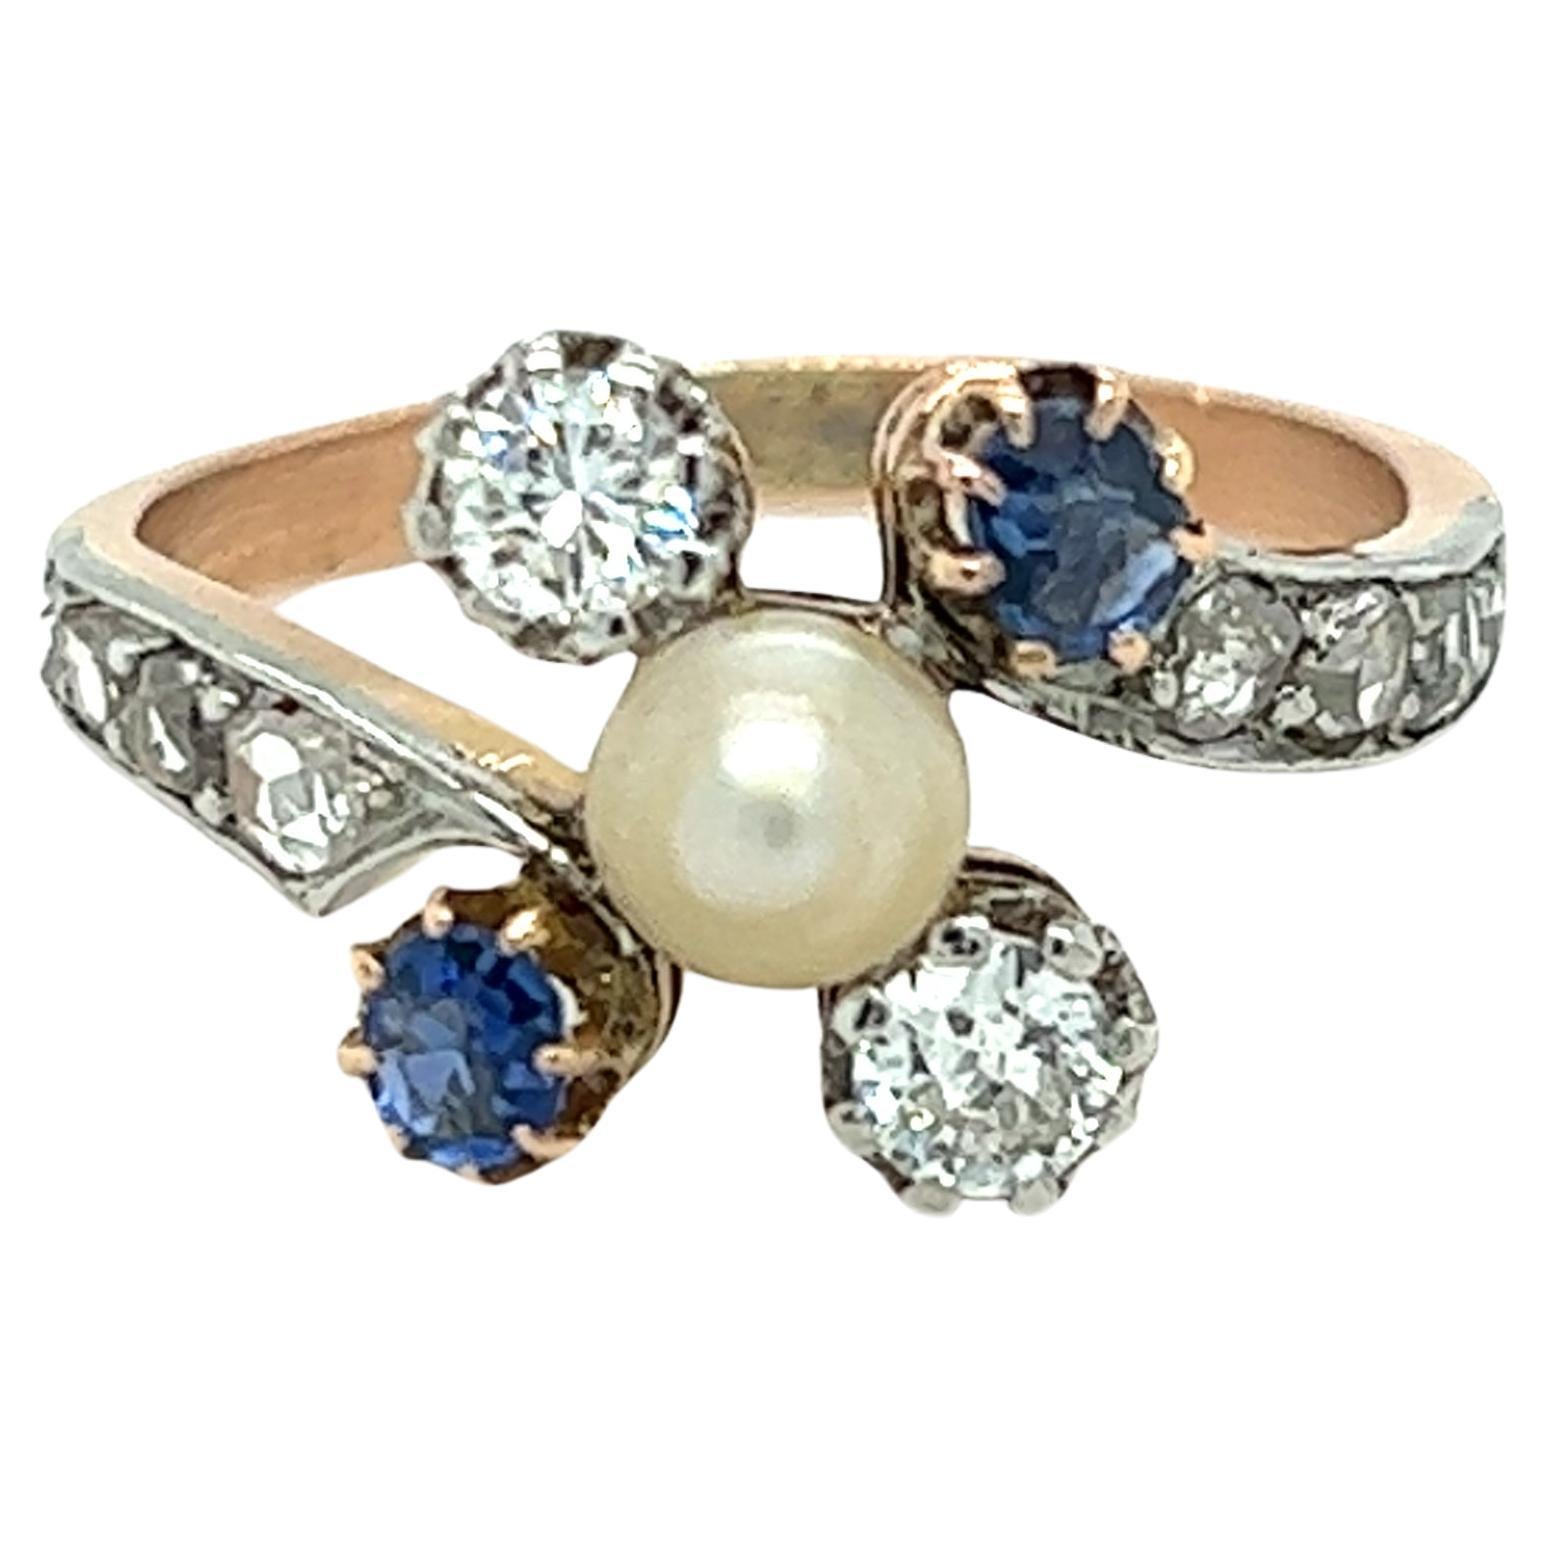 Edwardian Natural Pearl, Sapphire & Diamond Ring in 18K Rose Gold